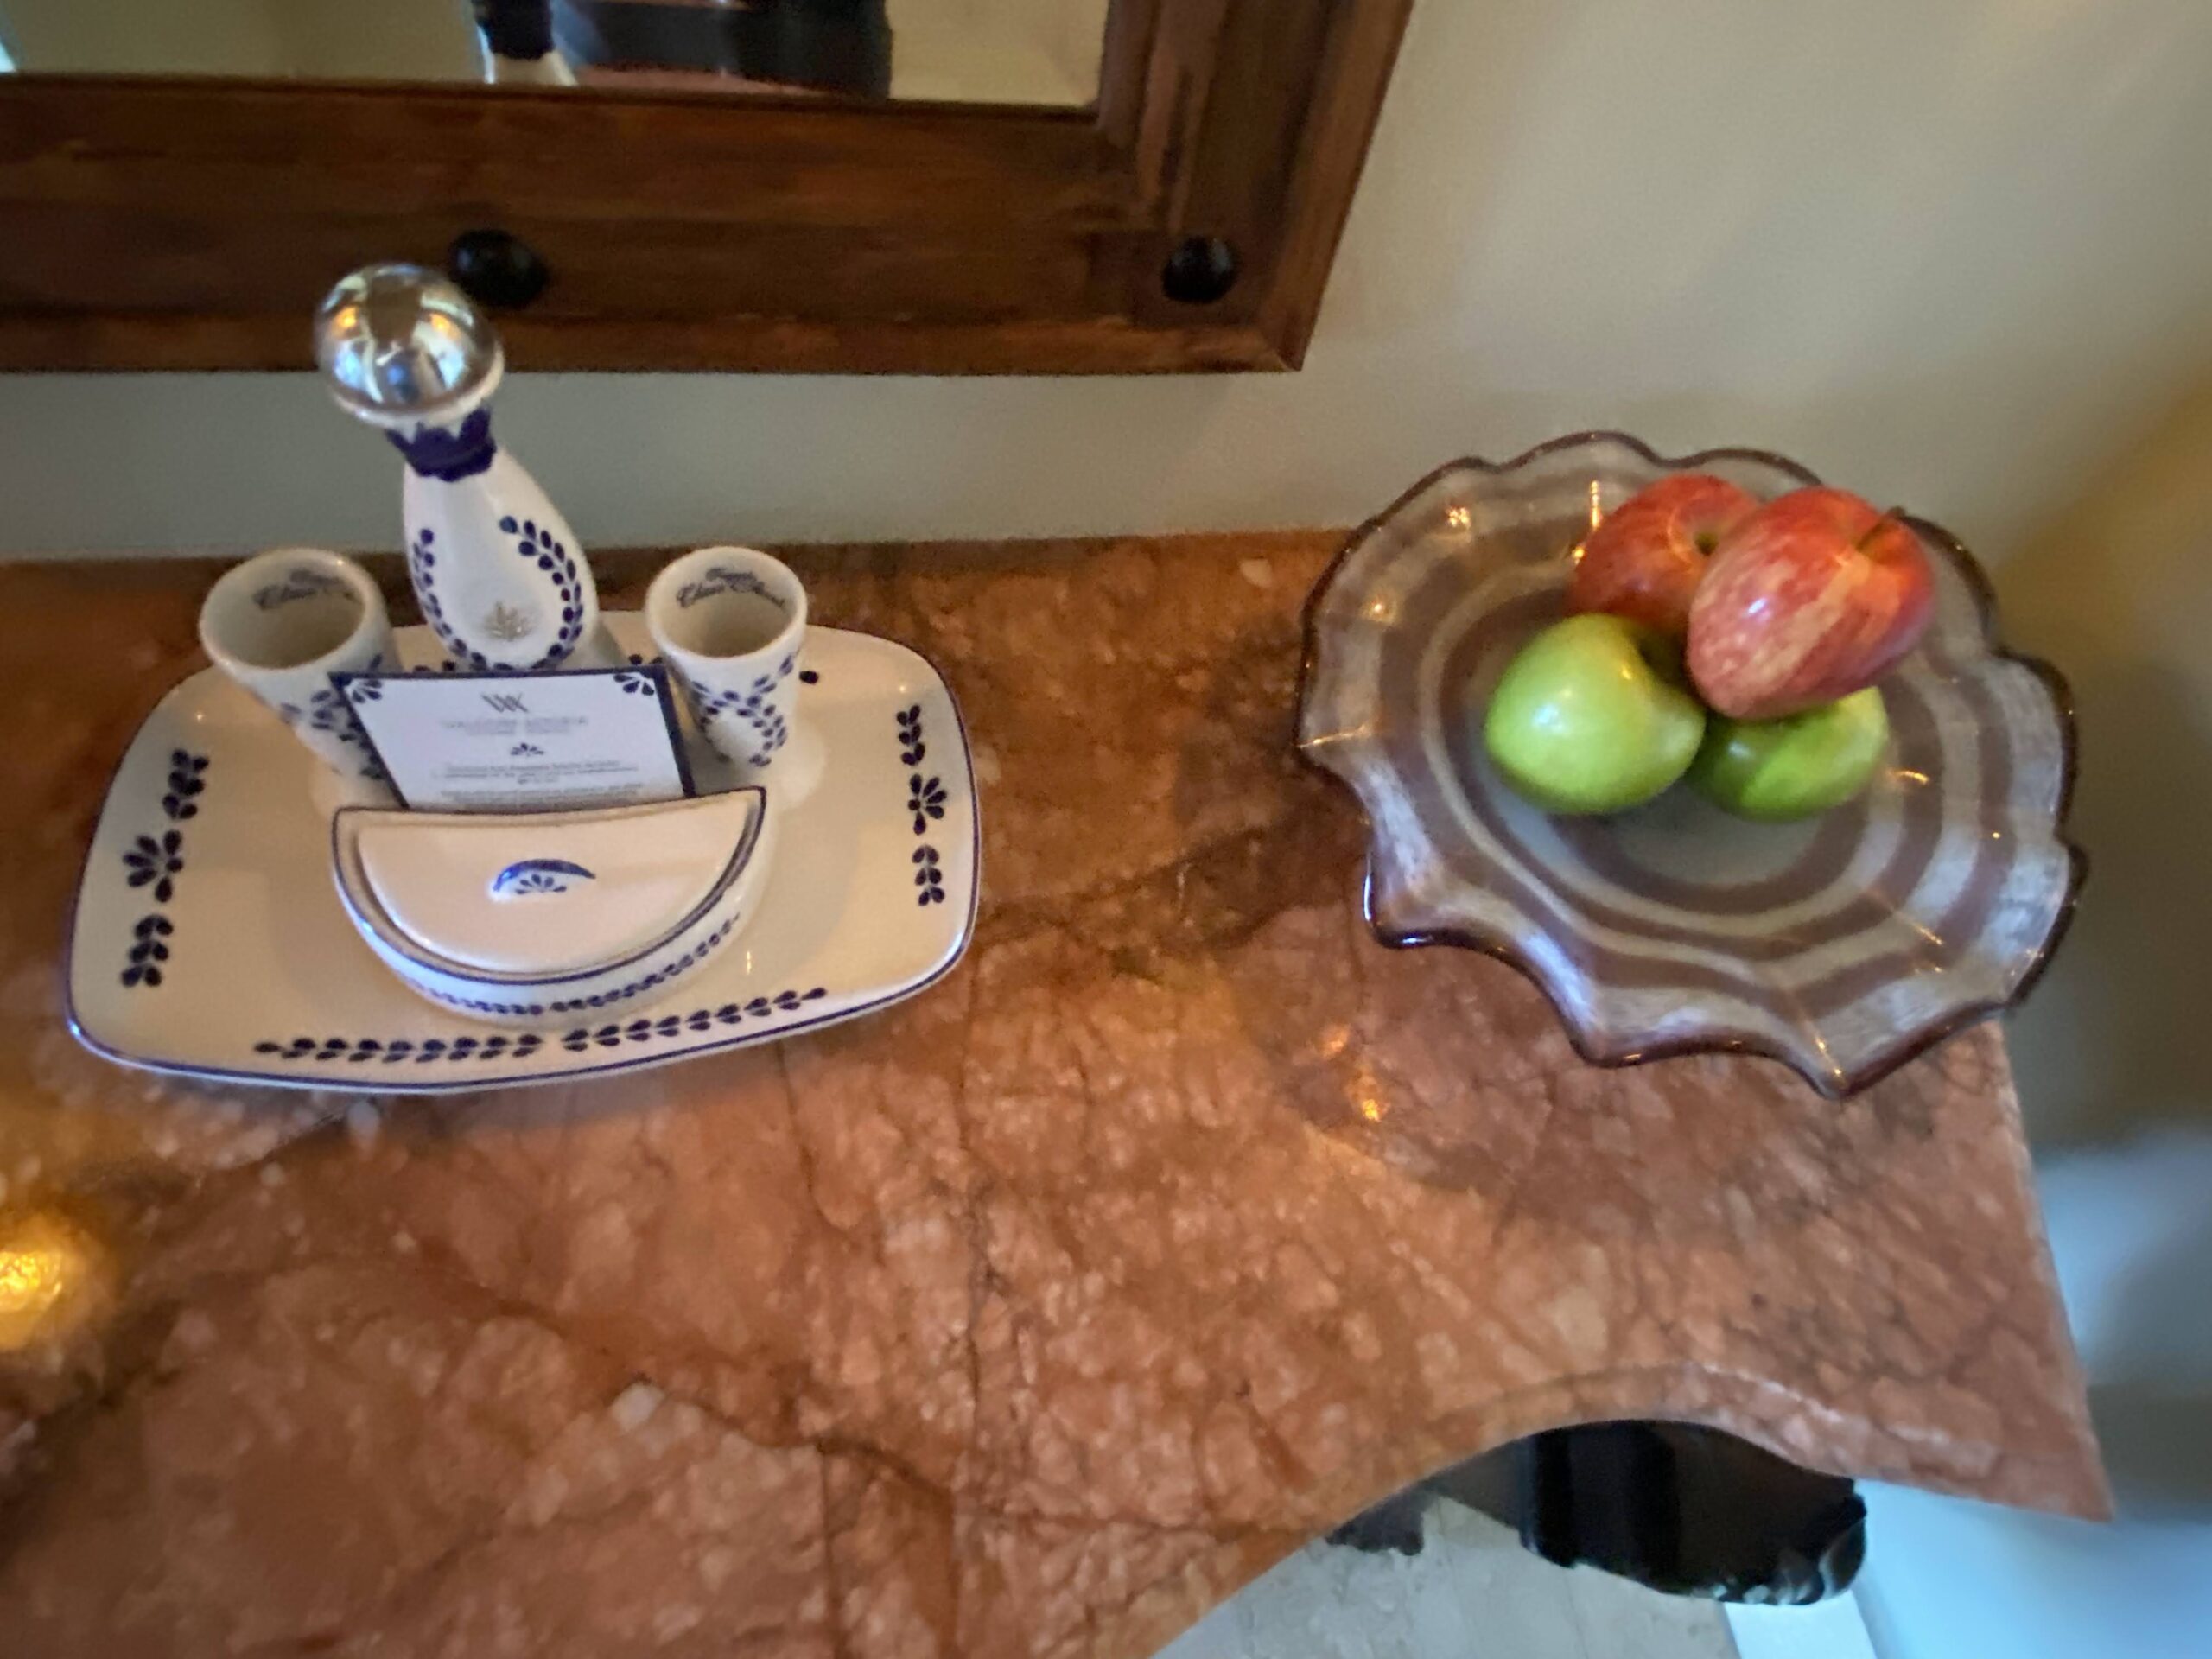 a plate of fruit and a bowl of juice on a marble counter